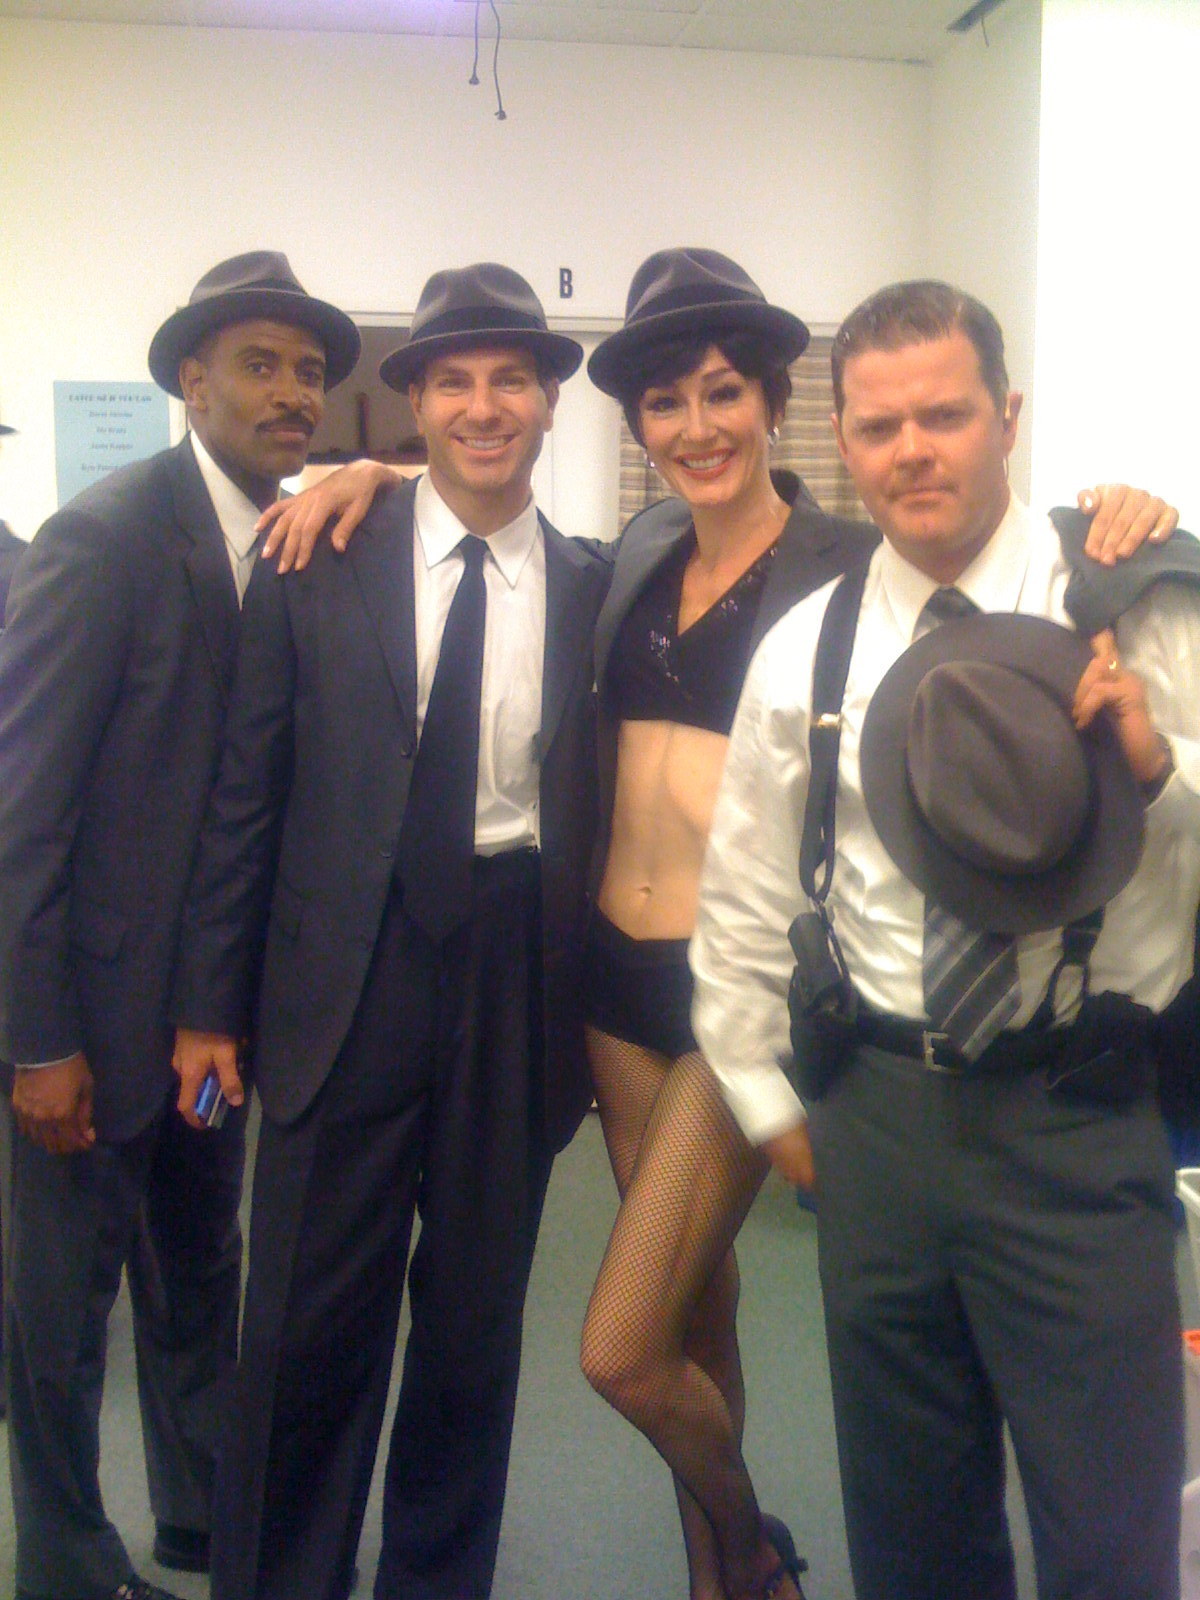 Backstage with FBI agents in 